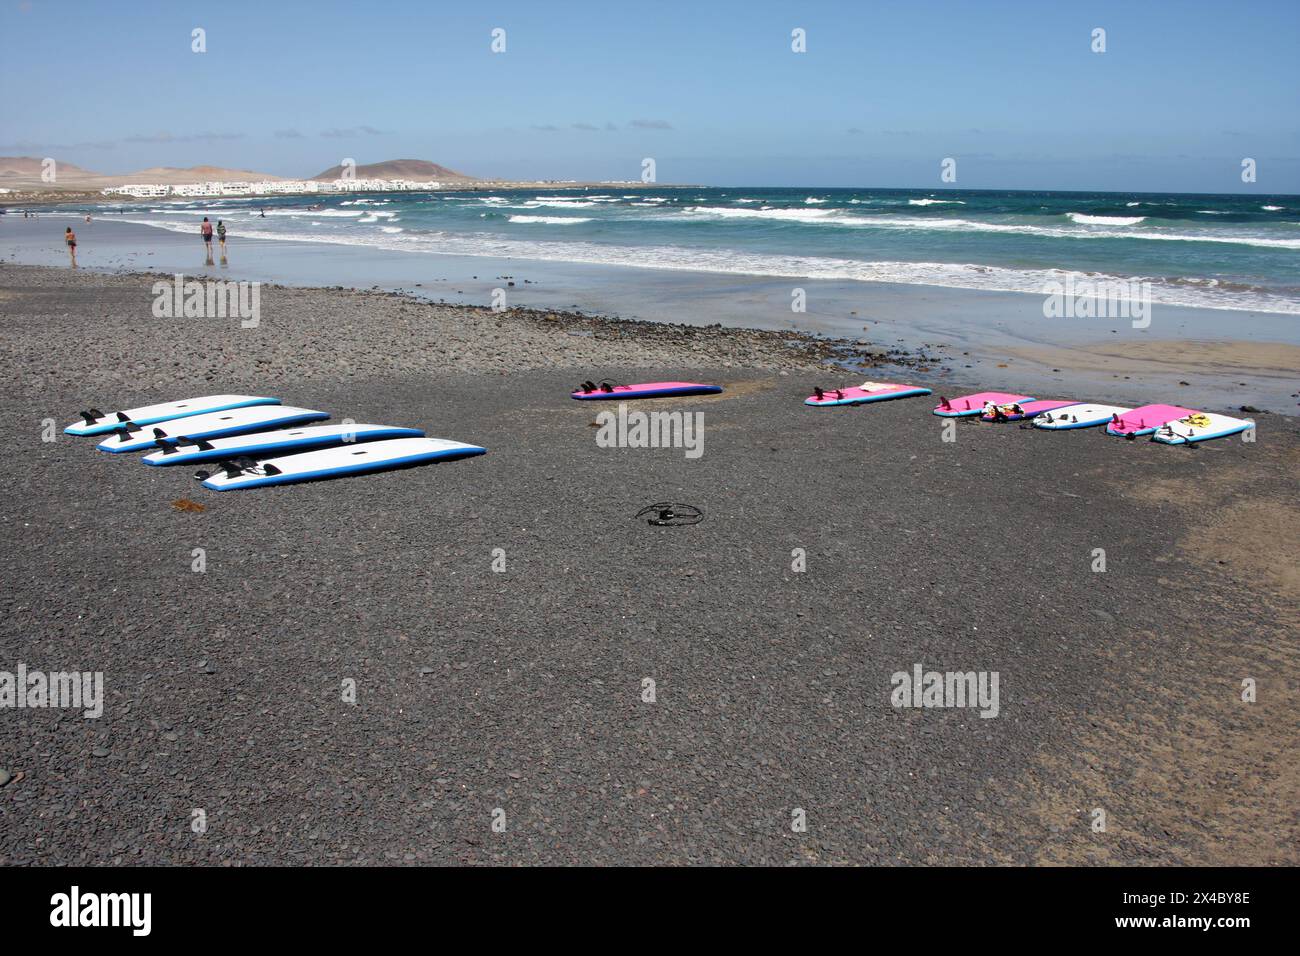 Surf schools on the beach at Famara Lanzarote Canary Islands Stock Photo